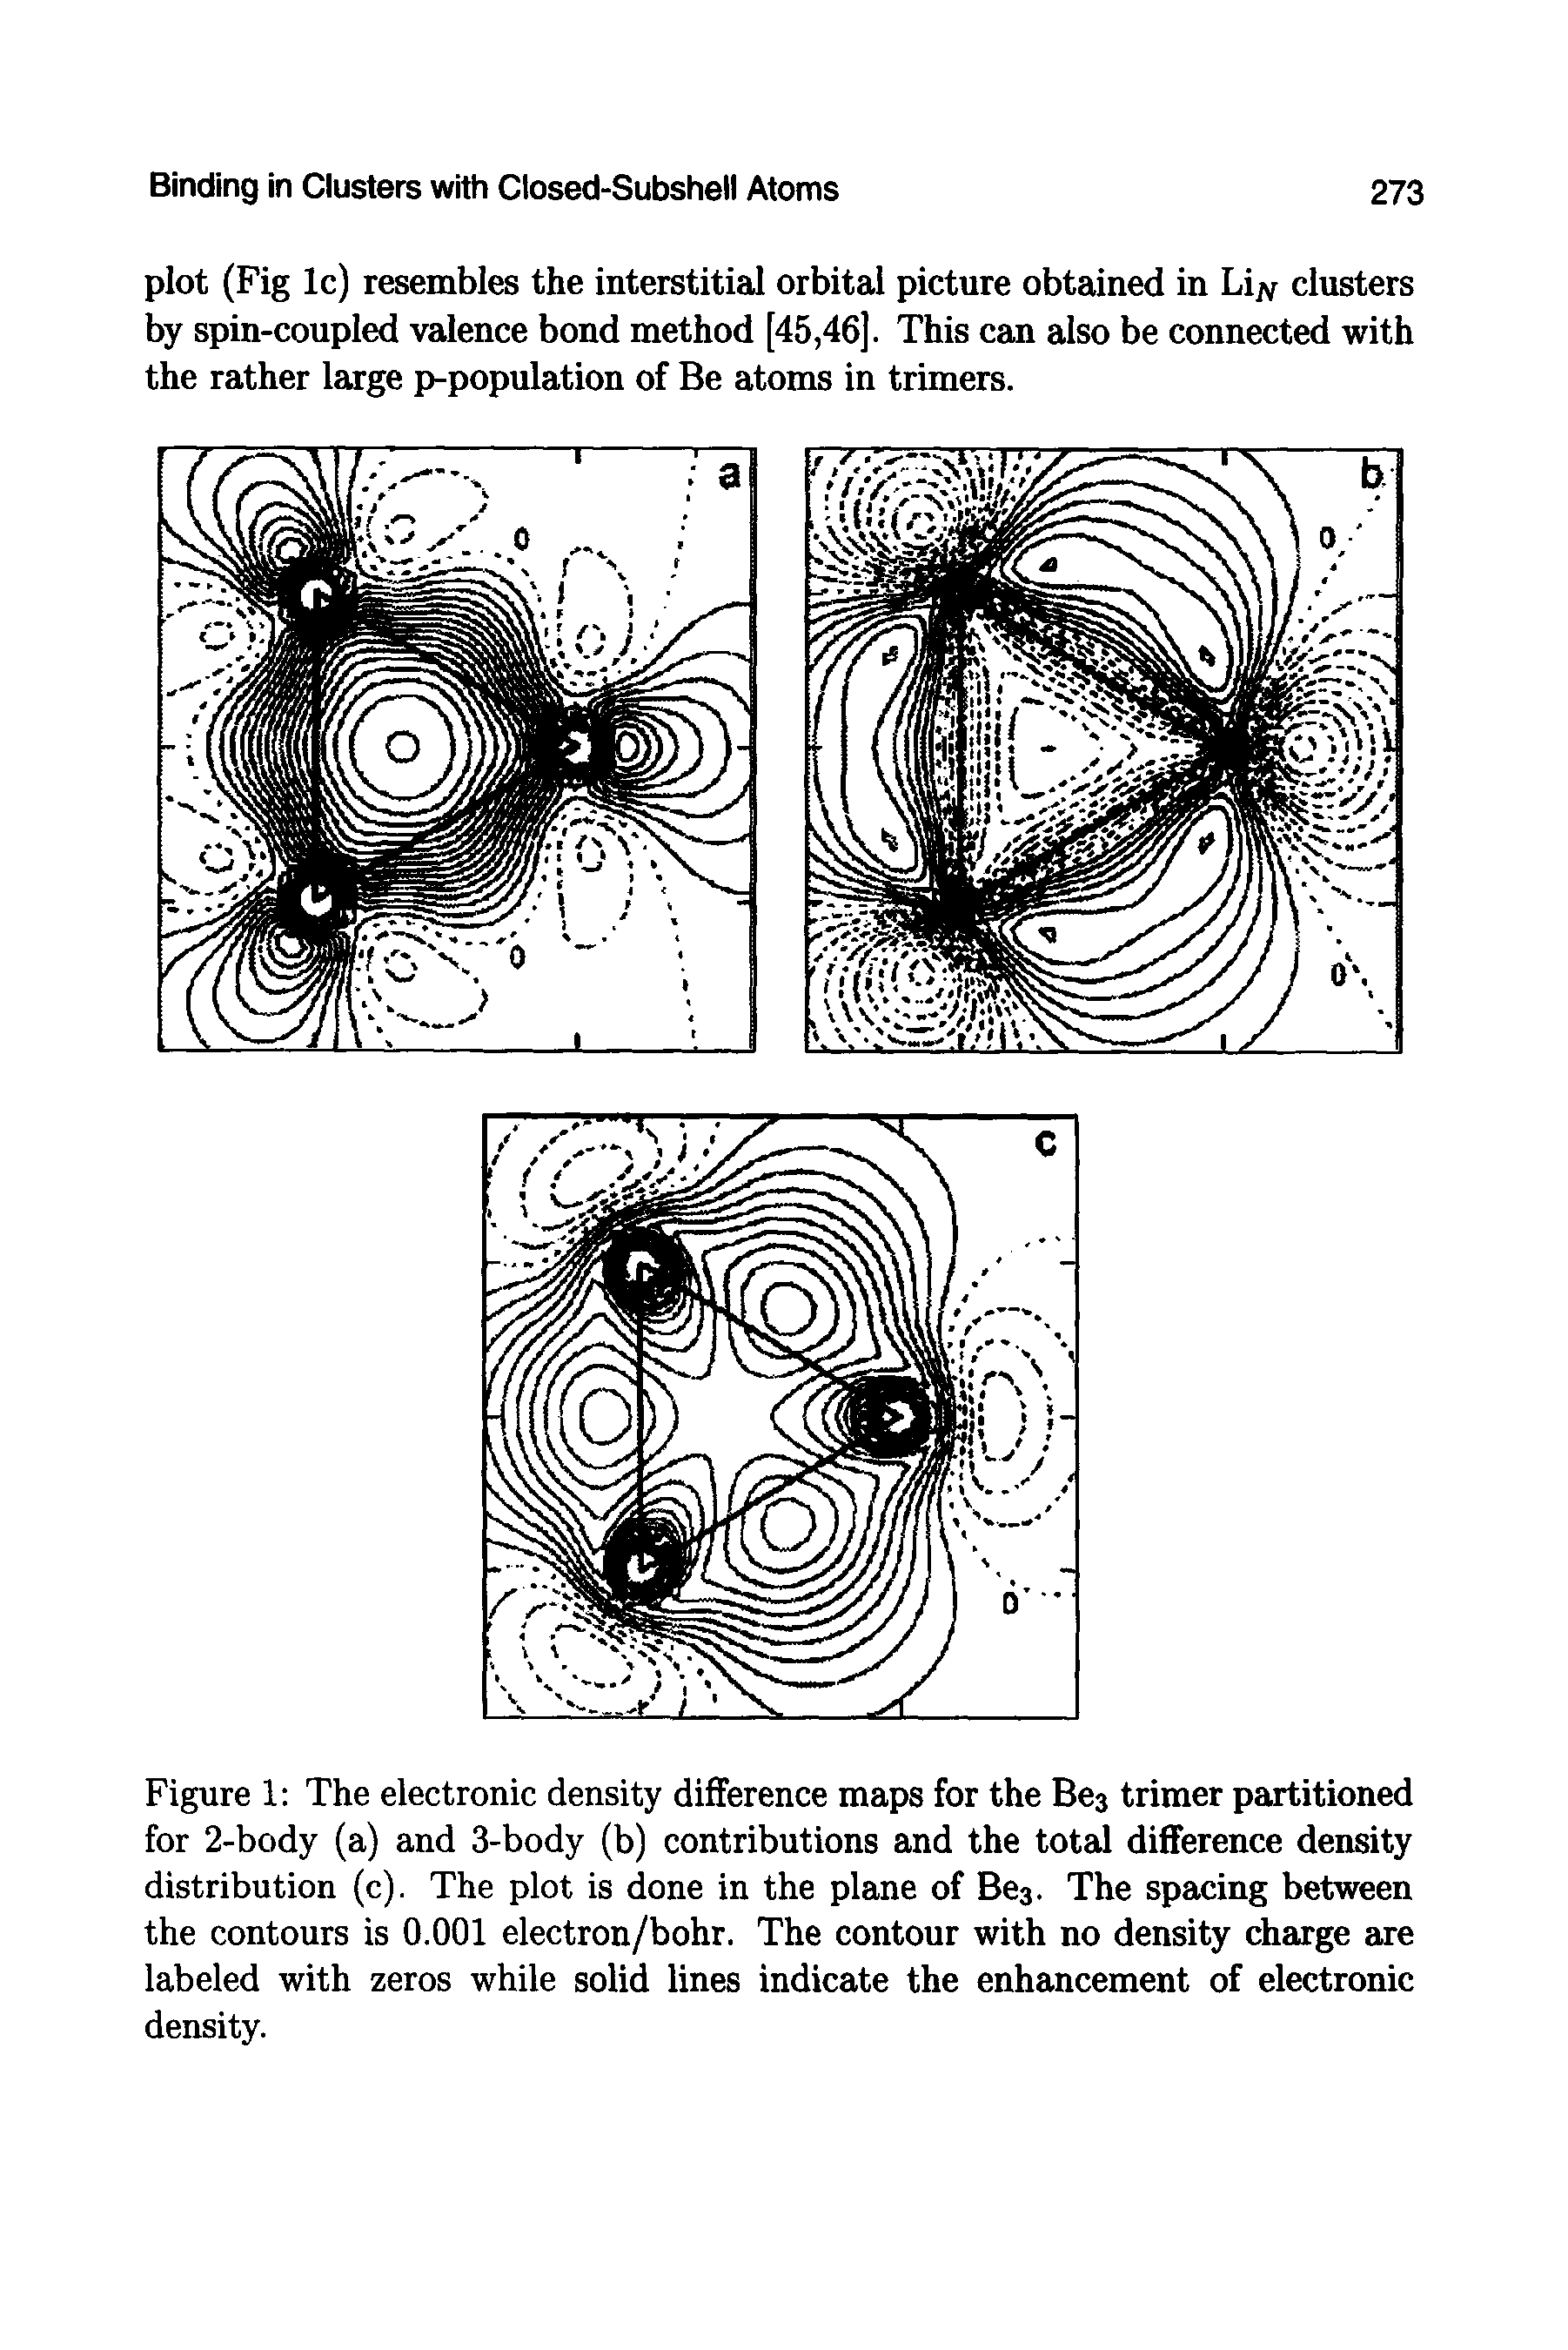 Figure 1 The electronic density difference maps for the Be3 trimer partitioned for 2-body (a) and 3-body (b) contributions and the total difference density distribution (c). The plot is done in the plane of Be3. The spacing between the contours is 0.001 electron/bohr. The contour with no density charge axe labeled with zeros while solid lines indicate the enhancement of electronic density.